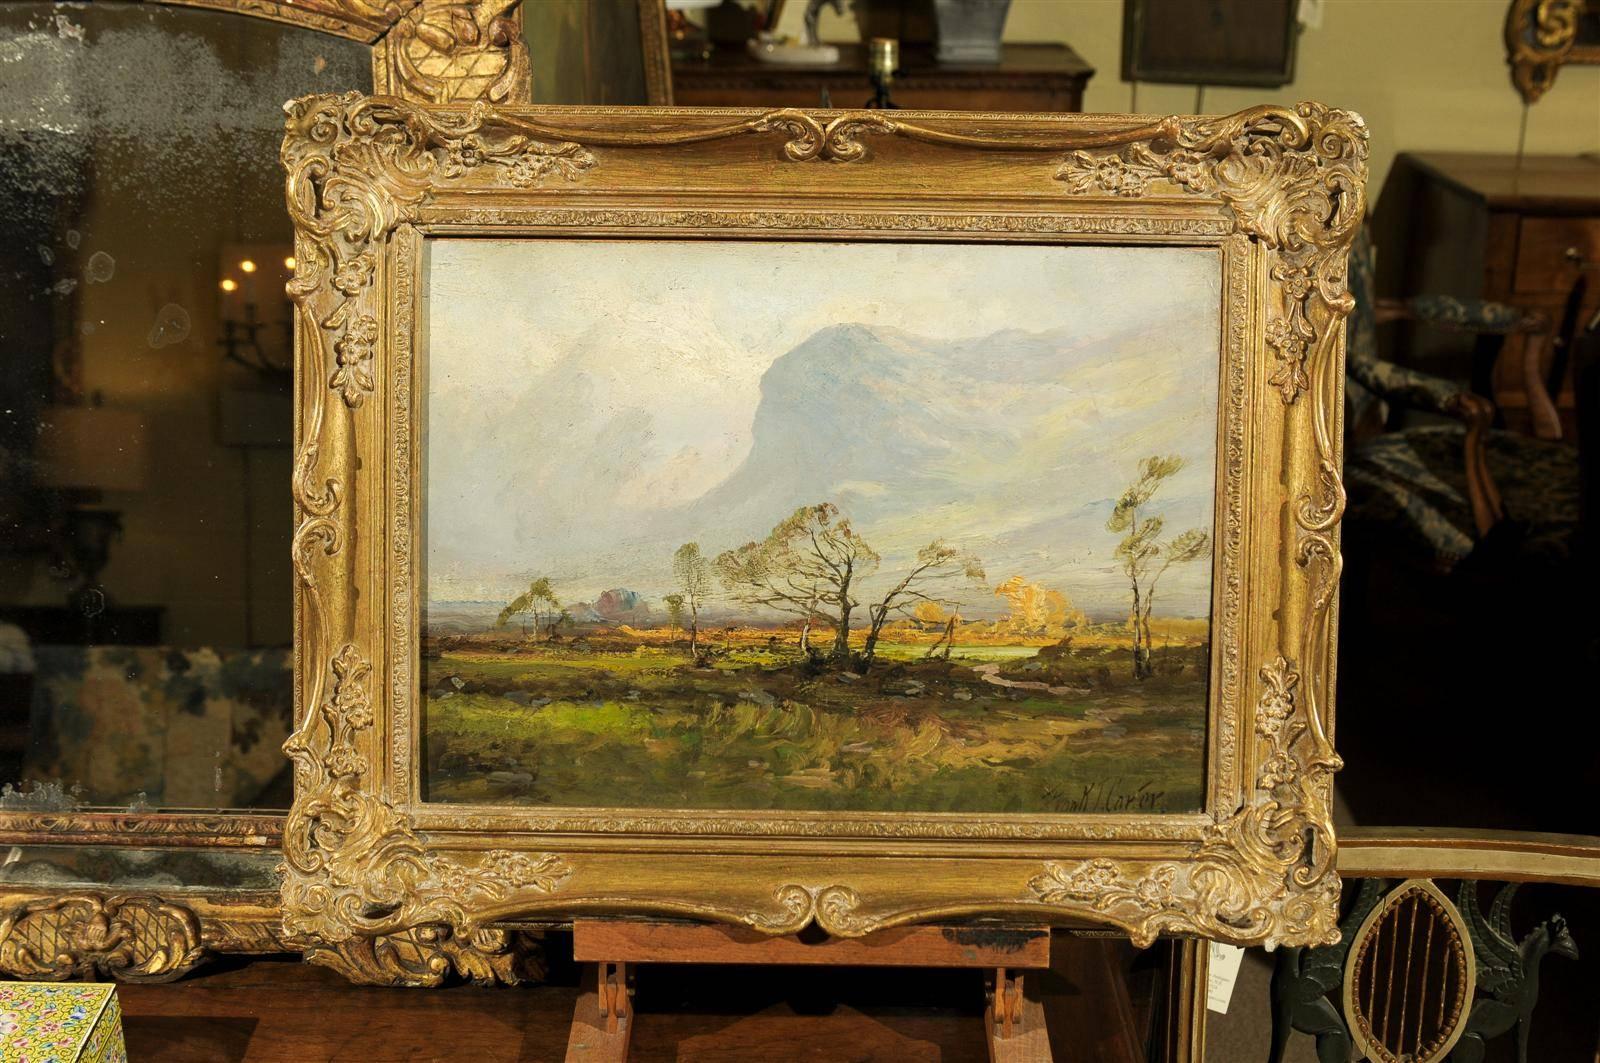 Oil on board landscape painting signed lower left by Frank T. Carter "Borrowdale Valley"; British artist 1853-1934.